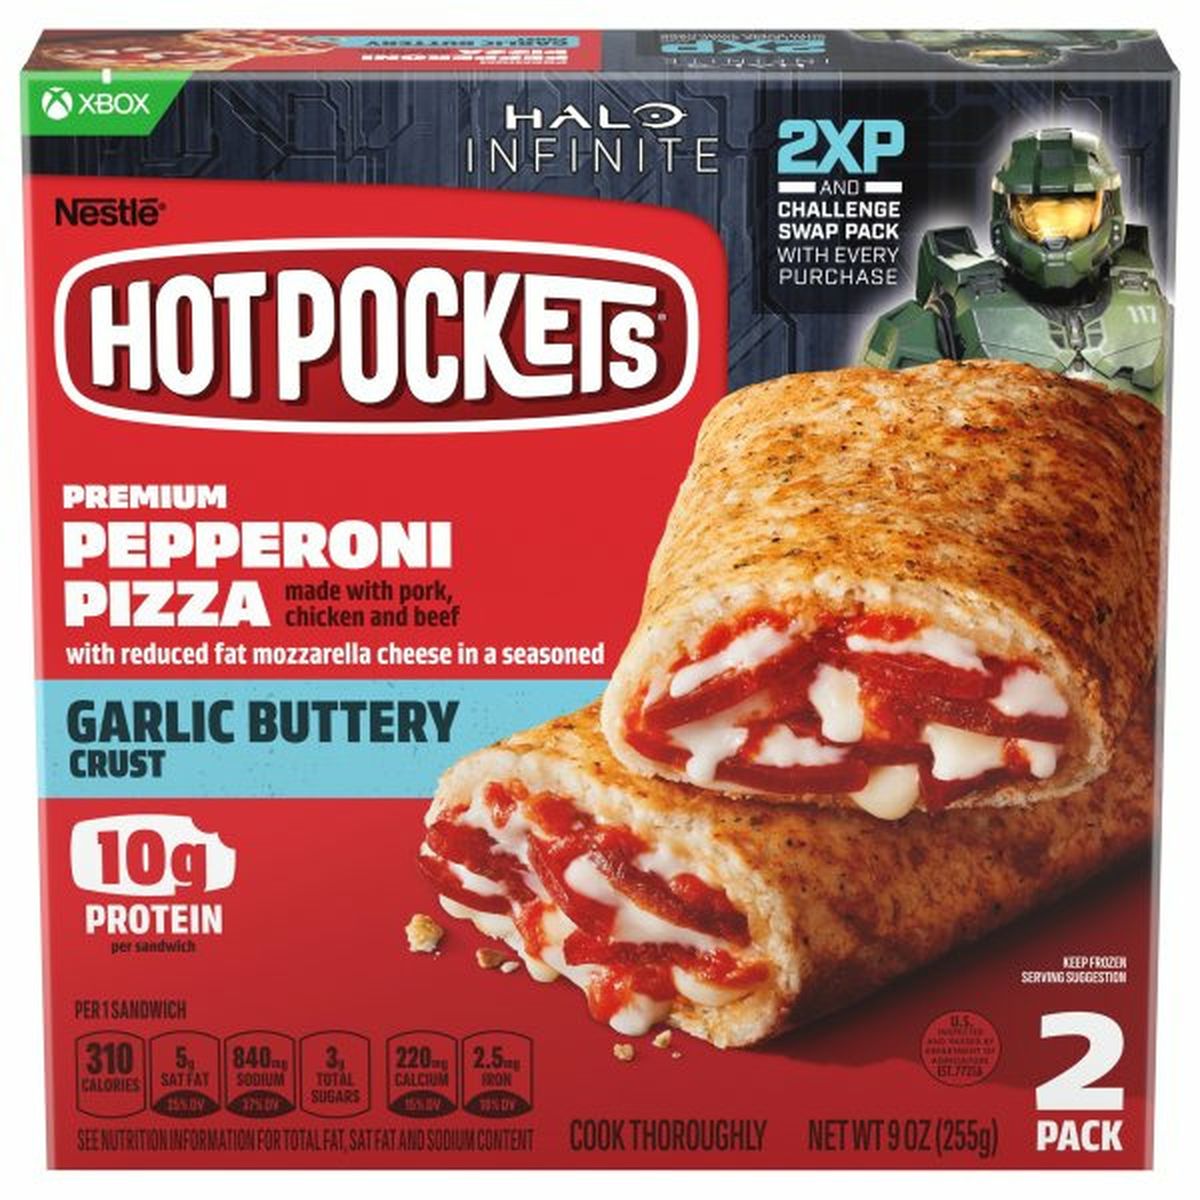 Calories in Hot Pockets Sandwiches, Premium, Garlic Buttery Crust, Pepperoni Pizza, 2 Pack